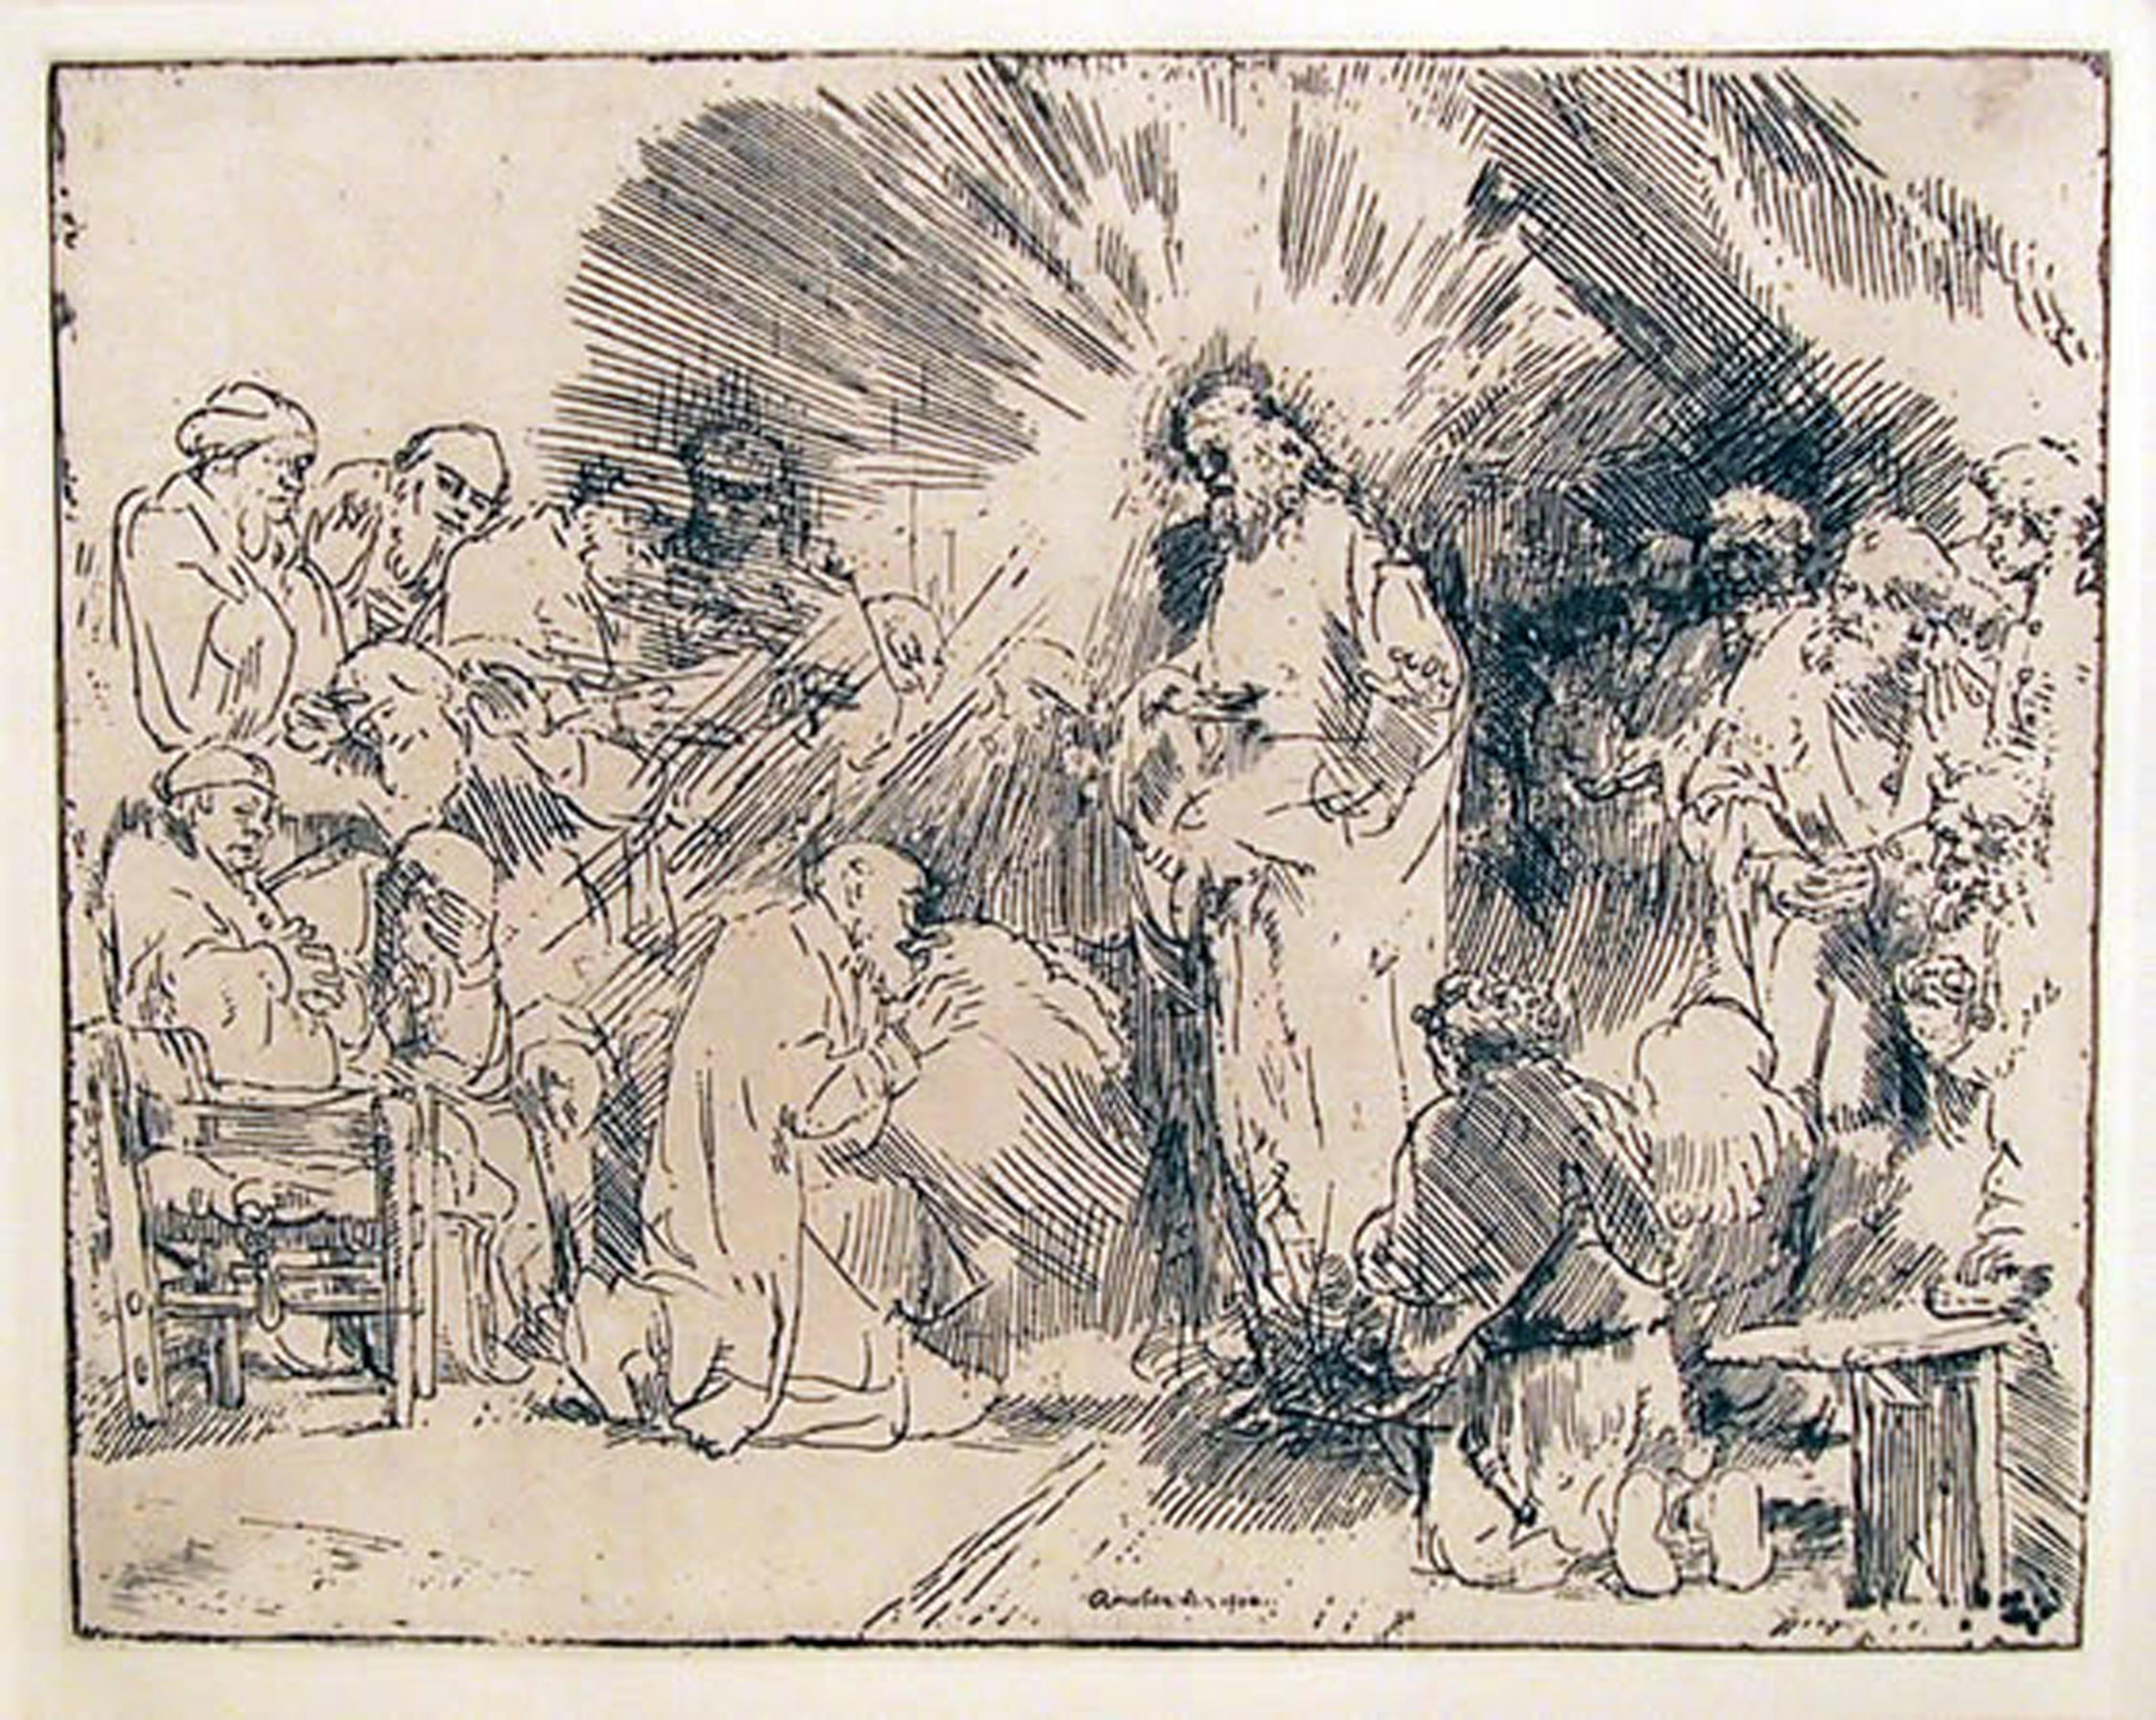  Rembrandt van Rijn, After by Amand Durand, Dutch (1606 - 1669) - Christ Appearing to the Apostles, Year: Of Original 1656, Medium: Etching, Image Size: 6.5 x 8.25 inches, Size: 14  x 15 in. (35.56  x 38.1 cm), Printer: Amand Durand, Description: